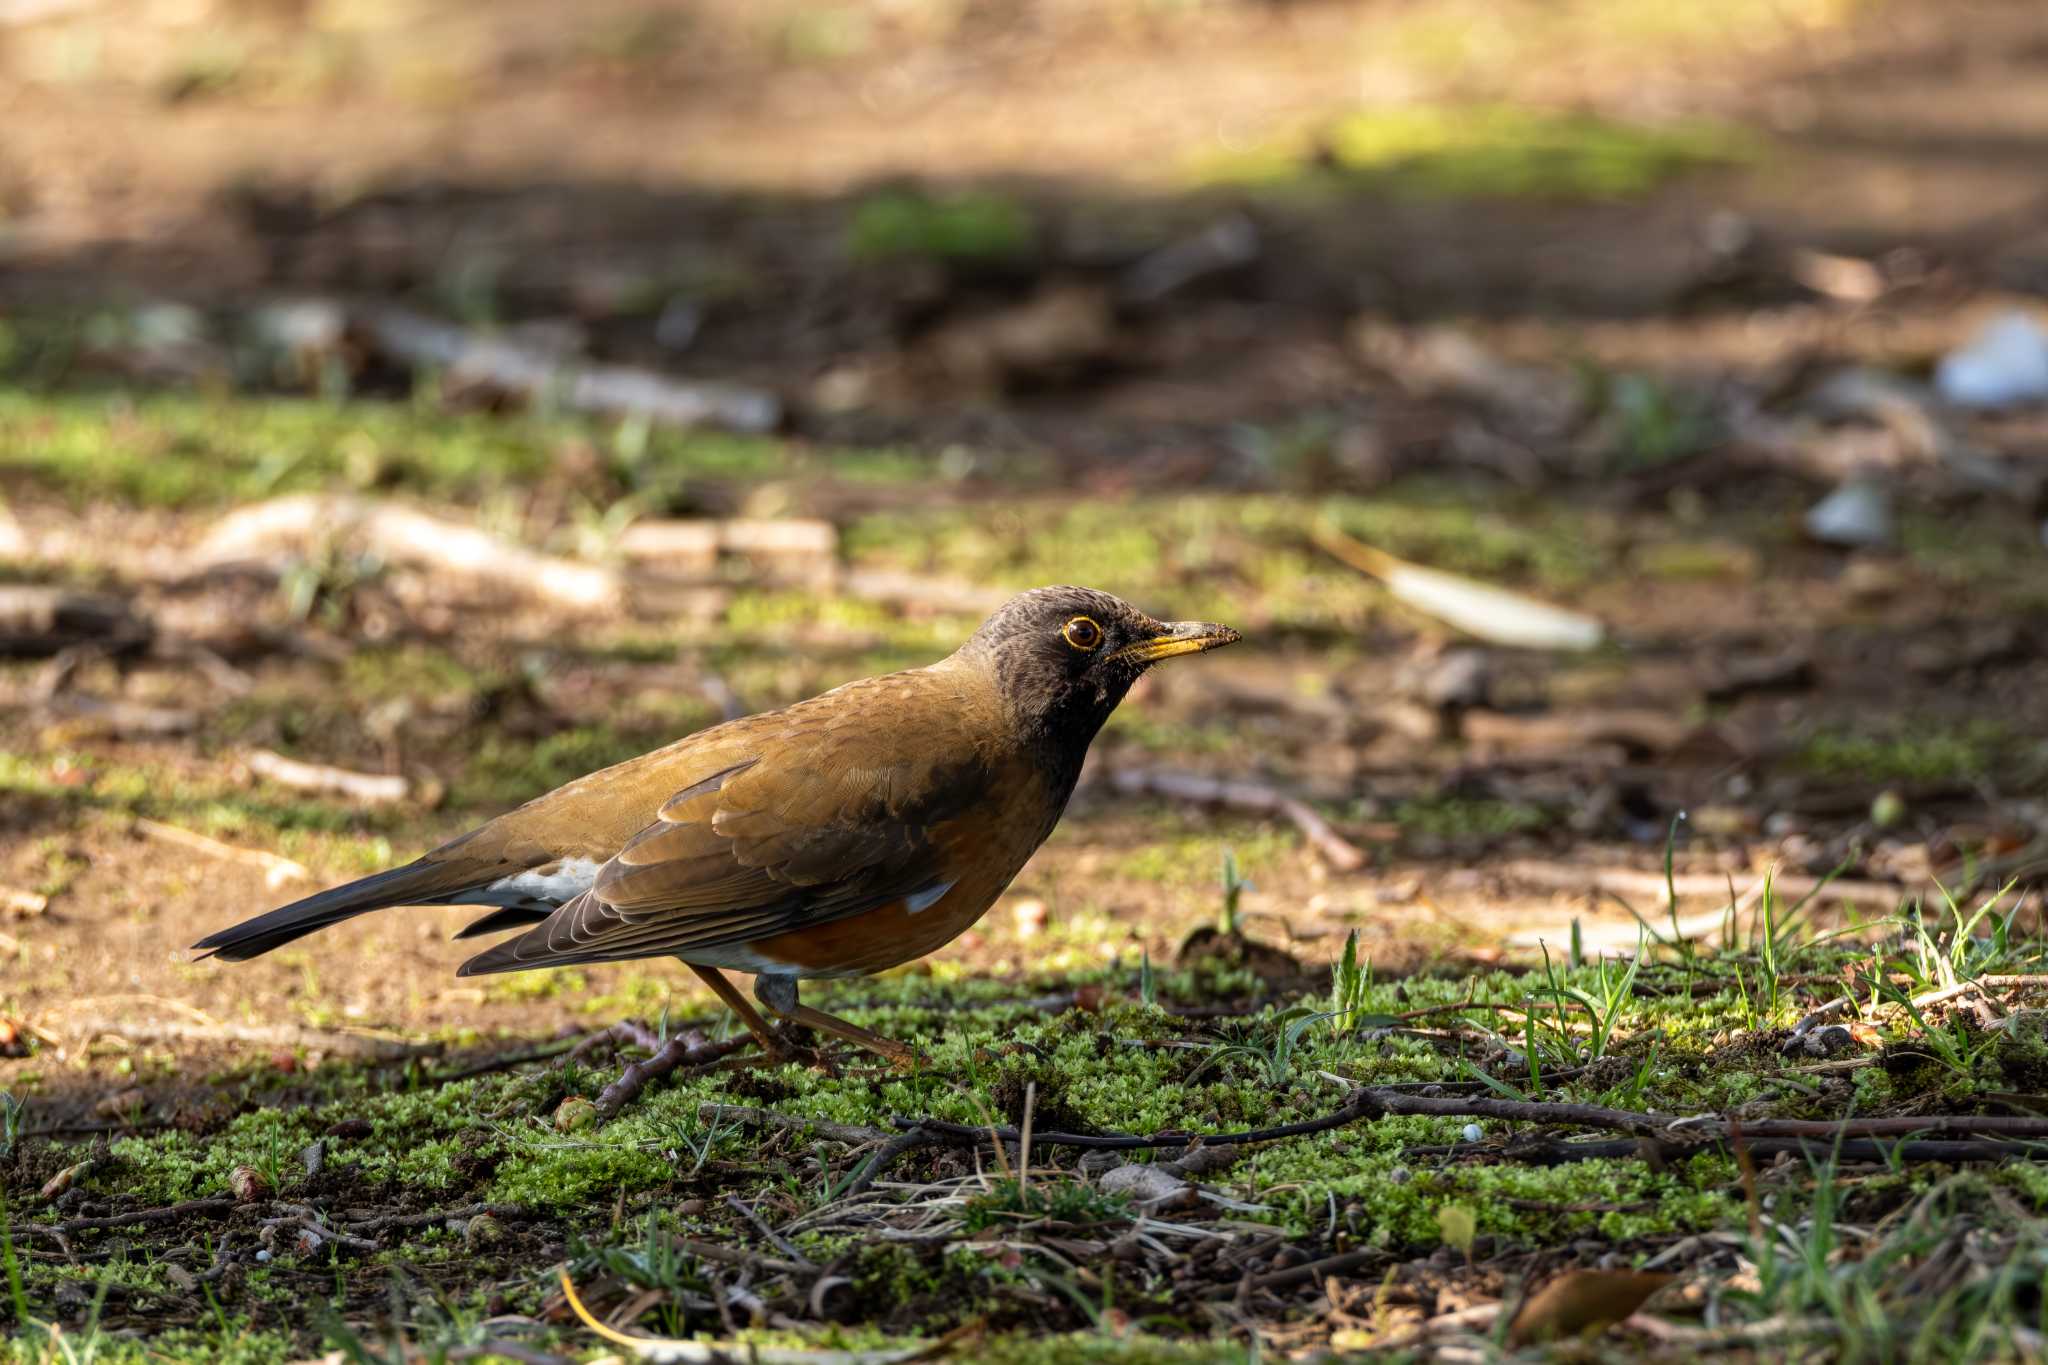 Photo of Brown-headed Thrush(orii) at 宍塚大池 by MNB EBSW